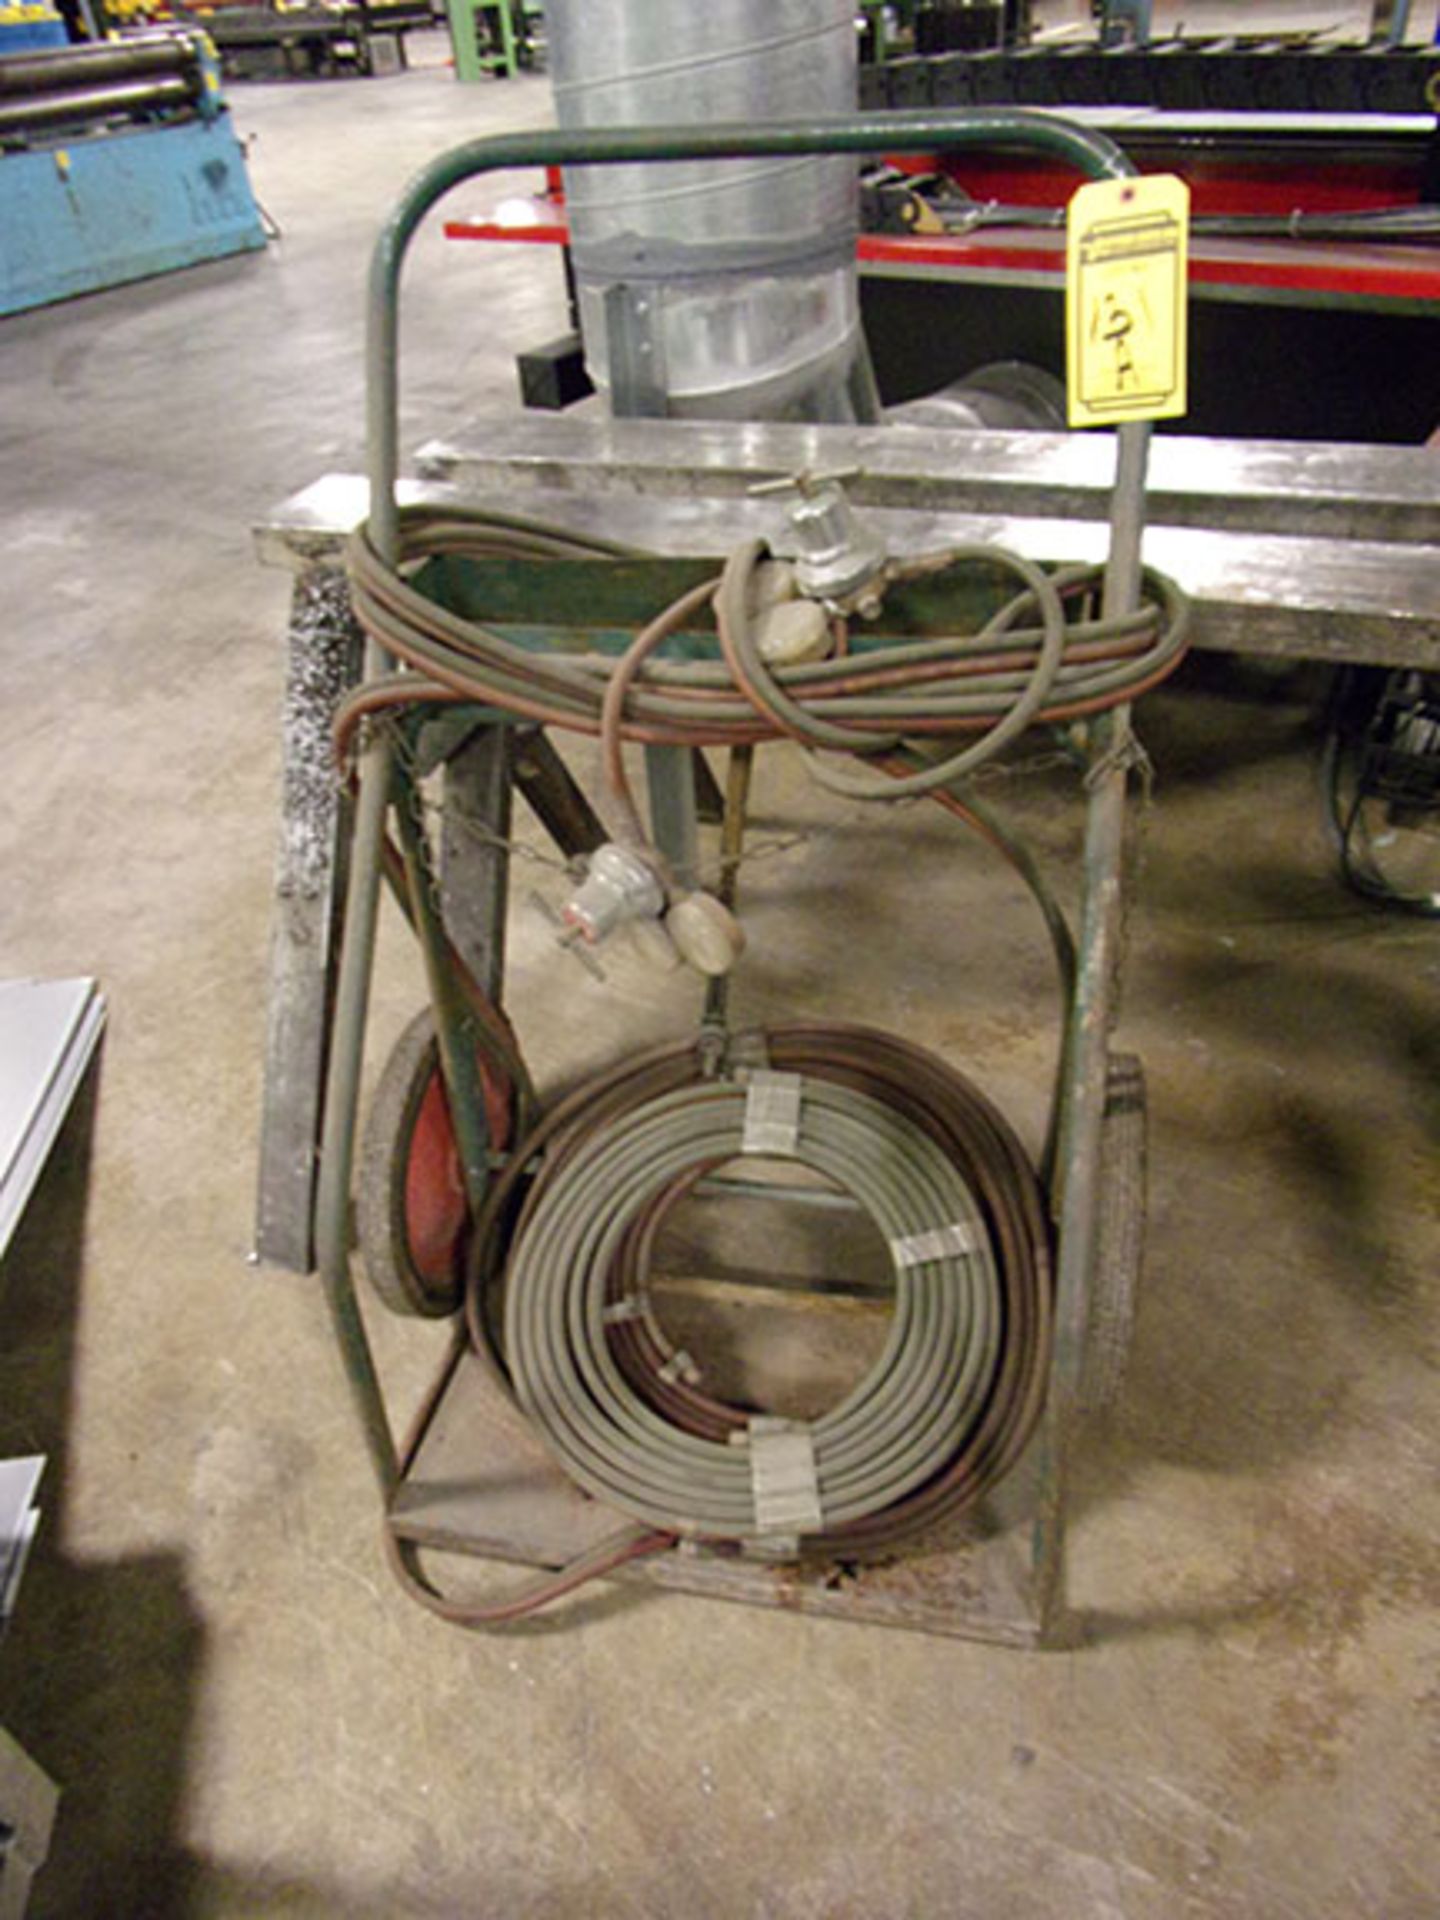 TORCH CART WITH GAUGES & HOSES